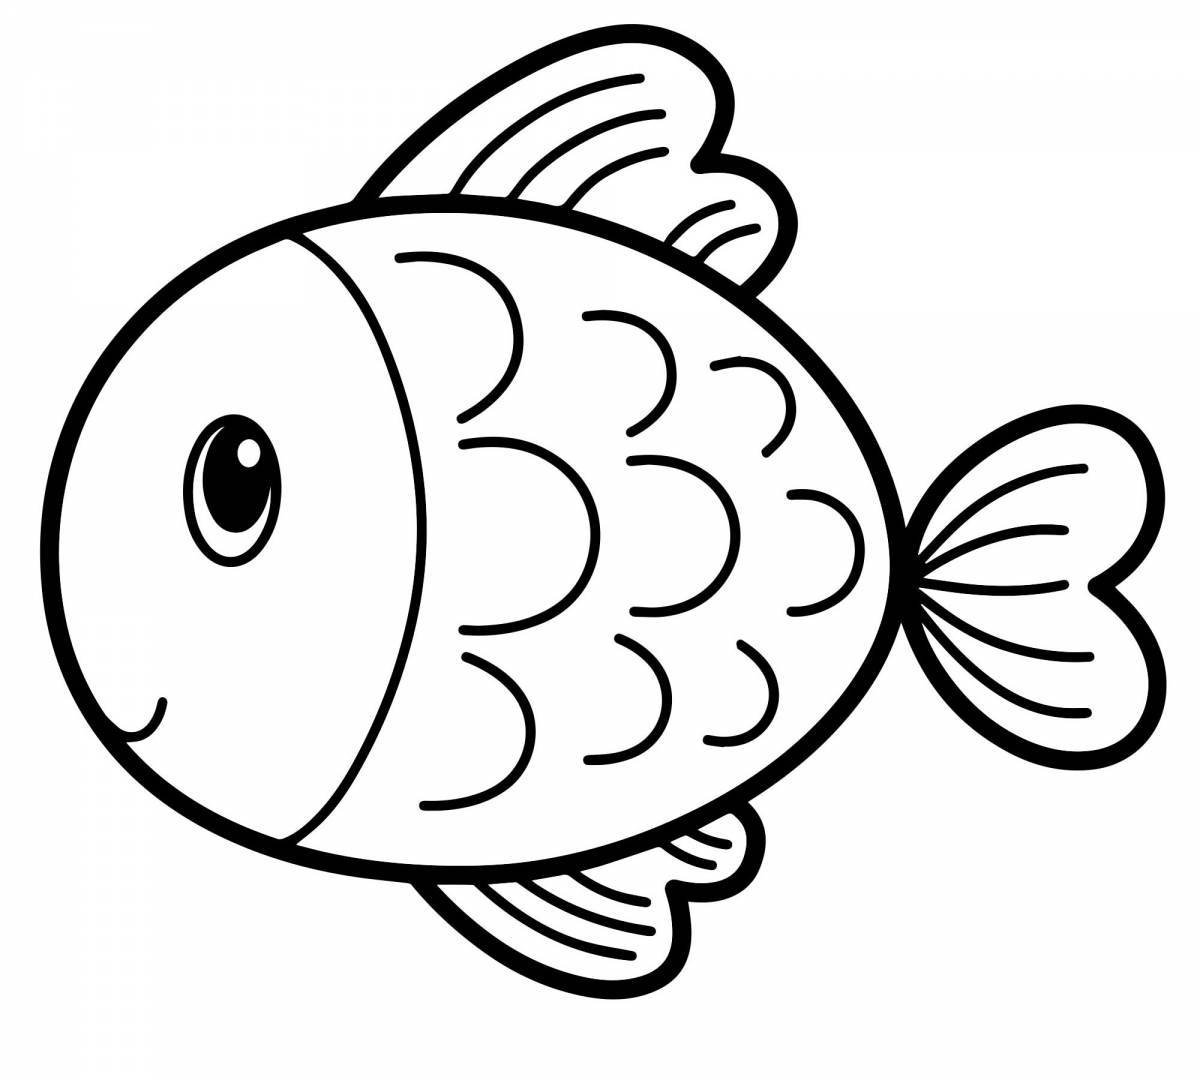 Fish for kids #6